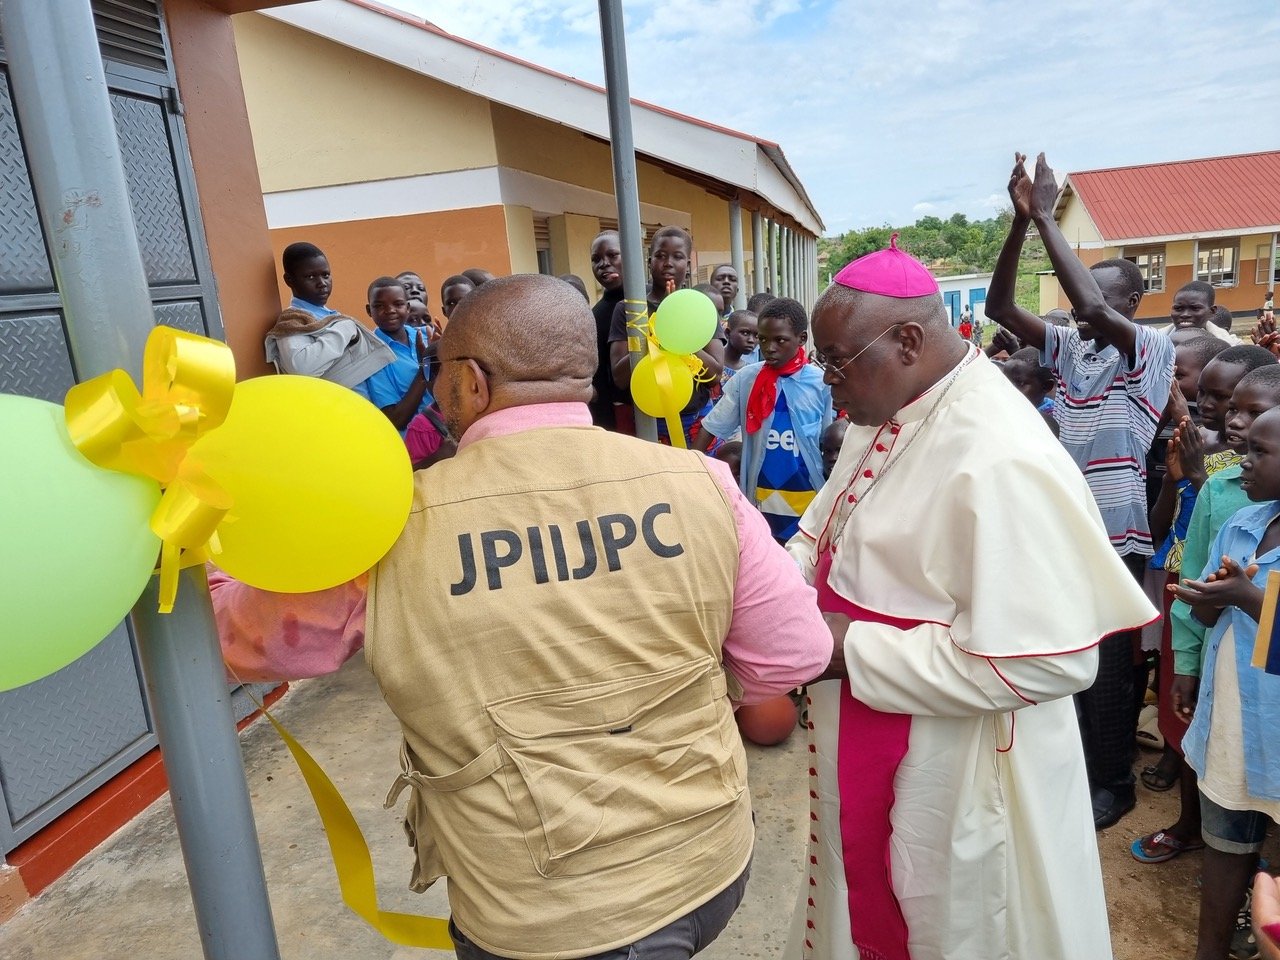 St. John Paul II Prize will go to Uganda justice and peace centre